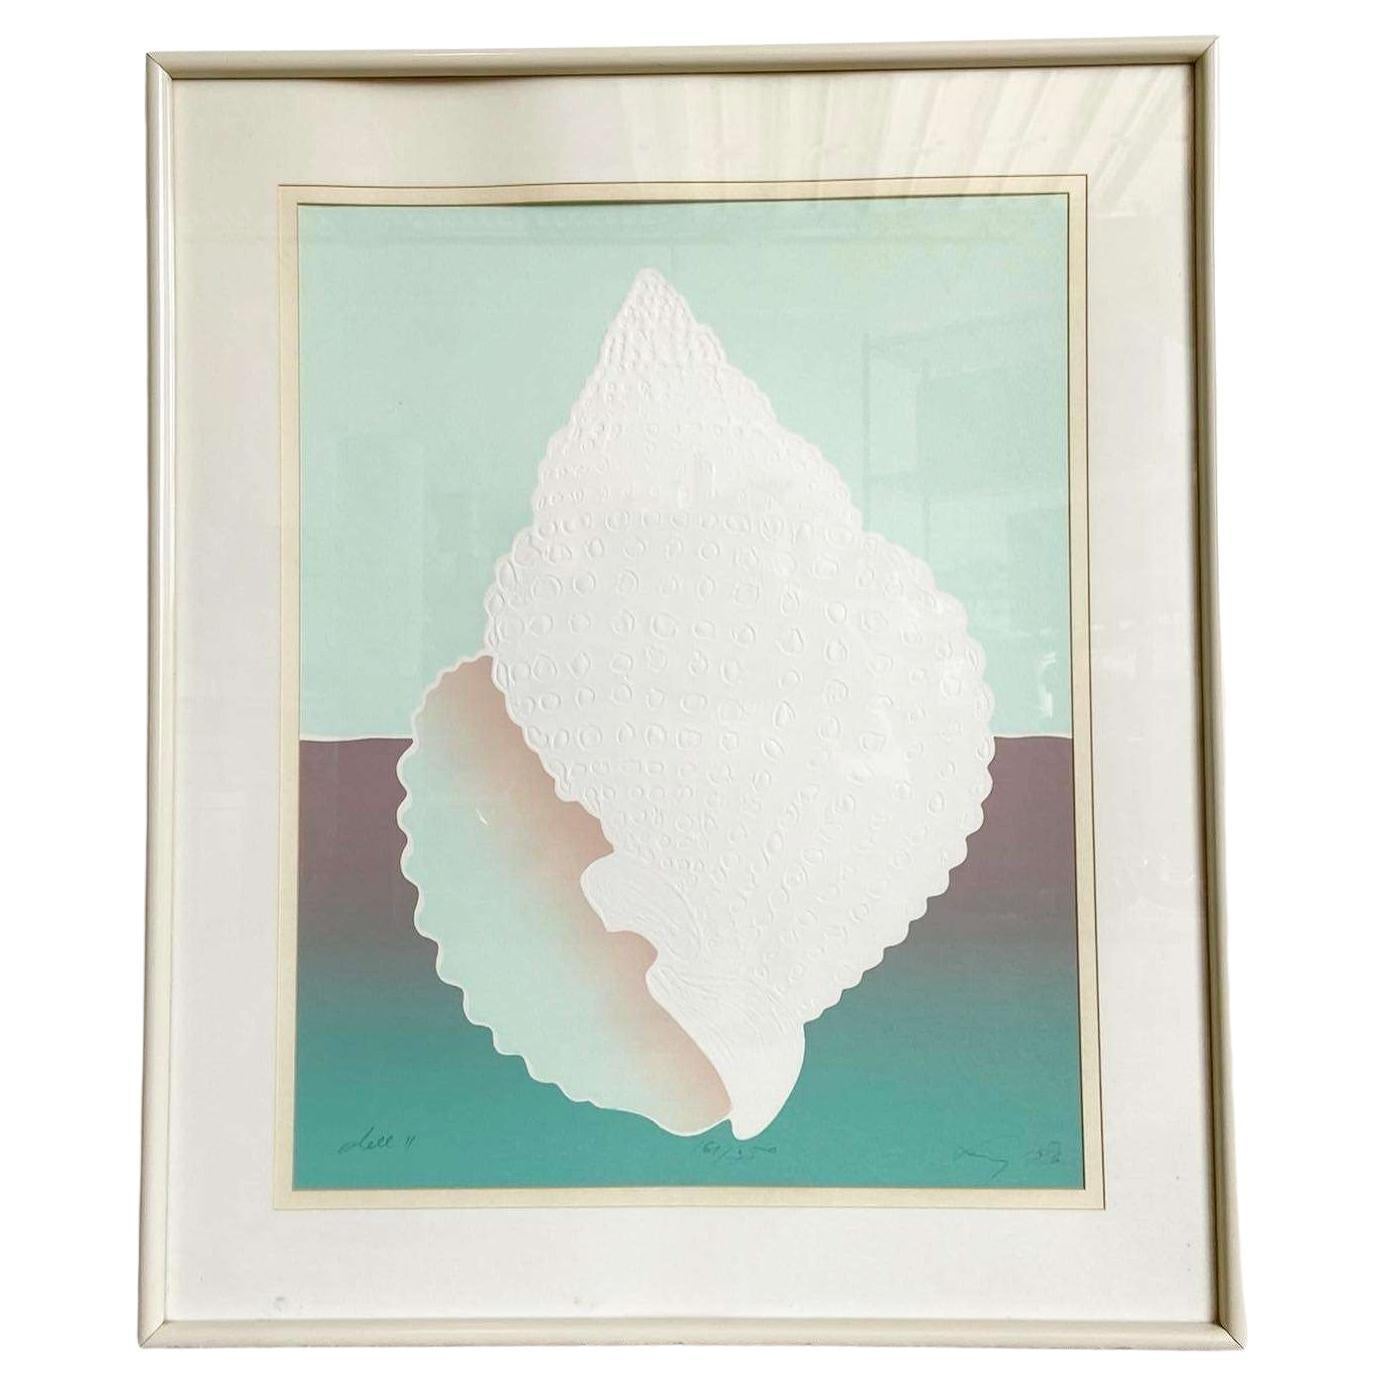 Postmodern Signed and Framed Lithograph Titled “Shell” For Sale